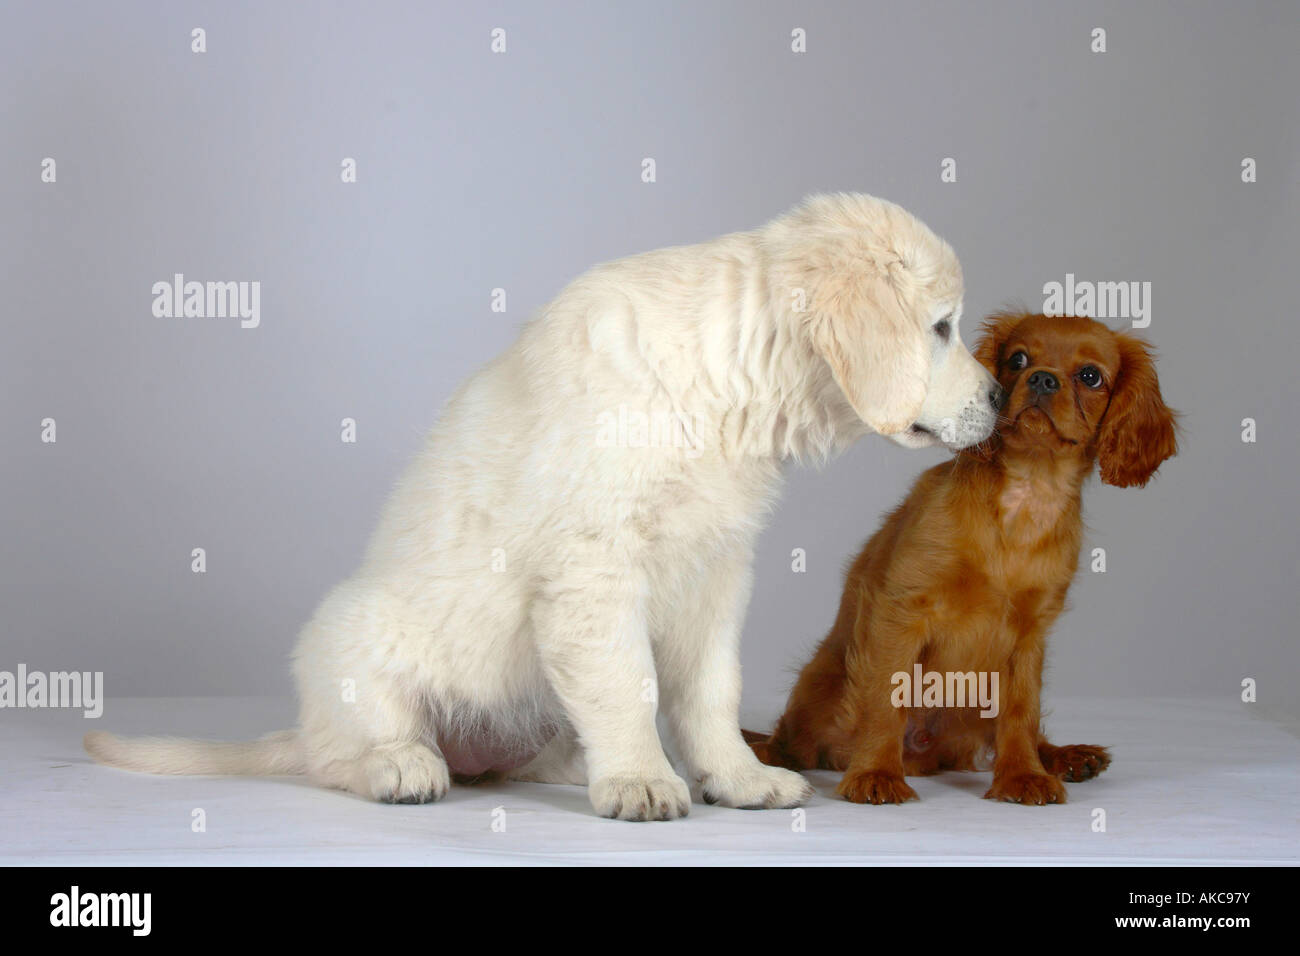 Golden Retriever And Cavalier King Charles Spaniel Puppies Stock Photo Alamy